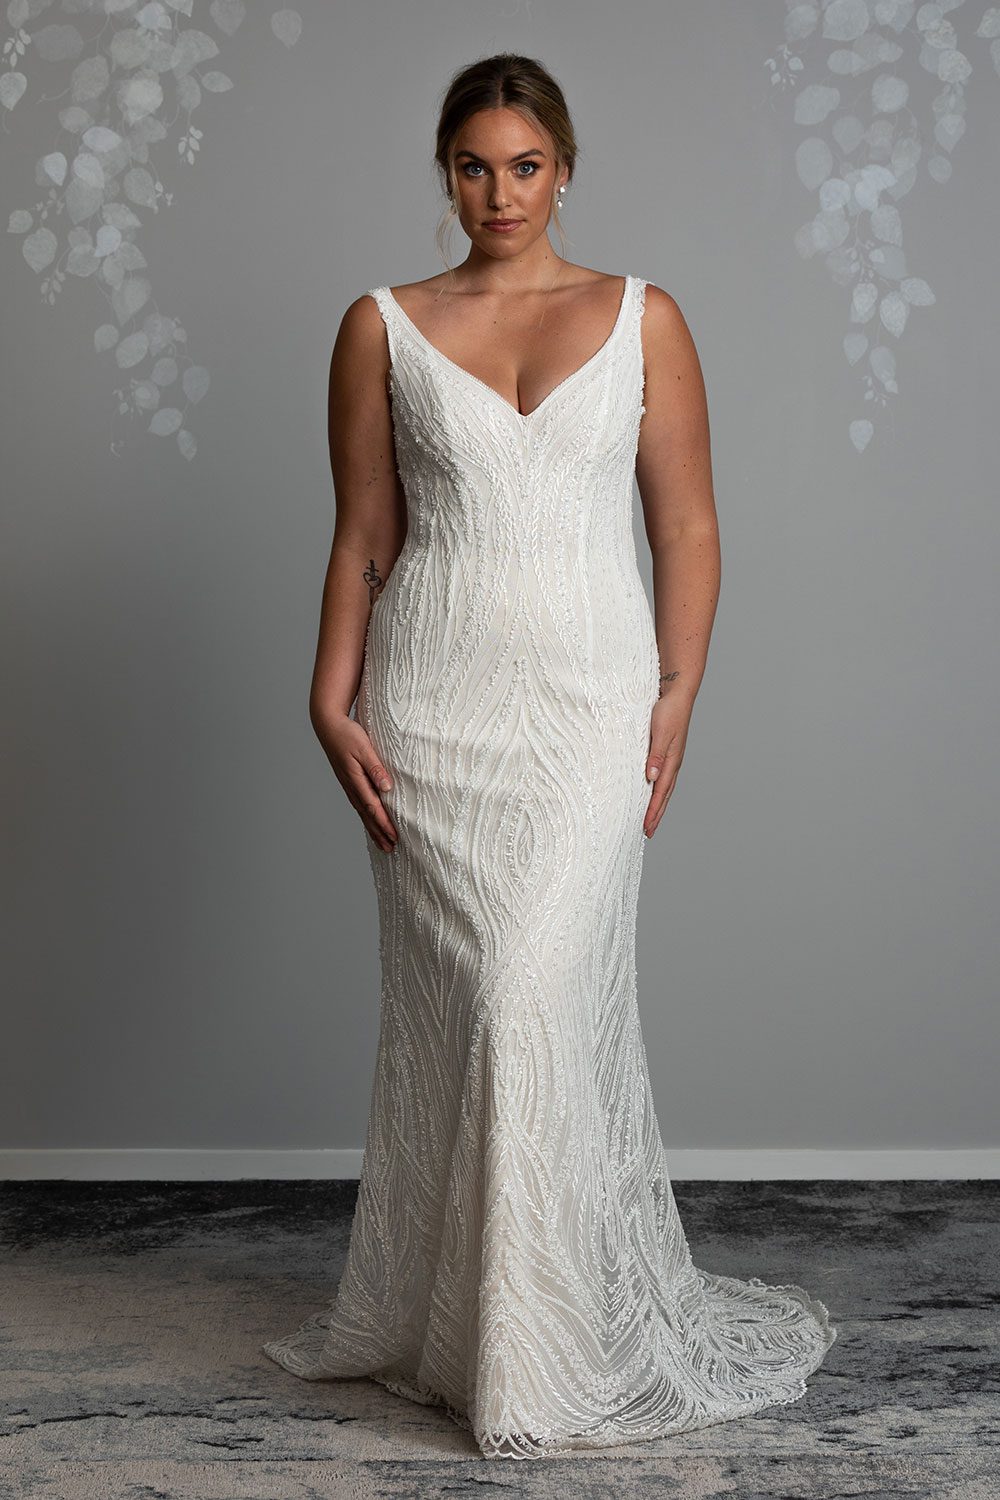 Kiera Wedding Dress from Vinka Design. Beautifully beaded lace wedding dress. Deep V-neckline both front and back is complemented with delicate sheer lace shoulder detail & structured bodice. Model with hands to hips wearing deep V-neckline dress with beaded lace